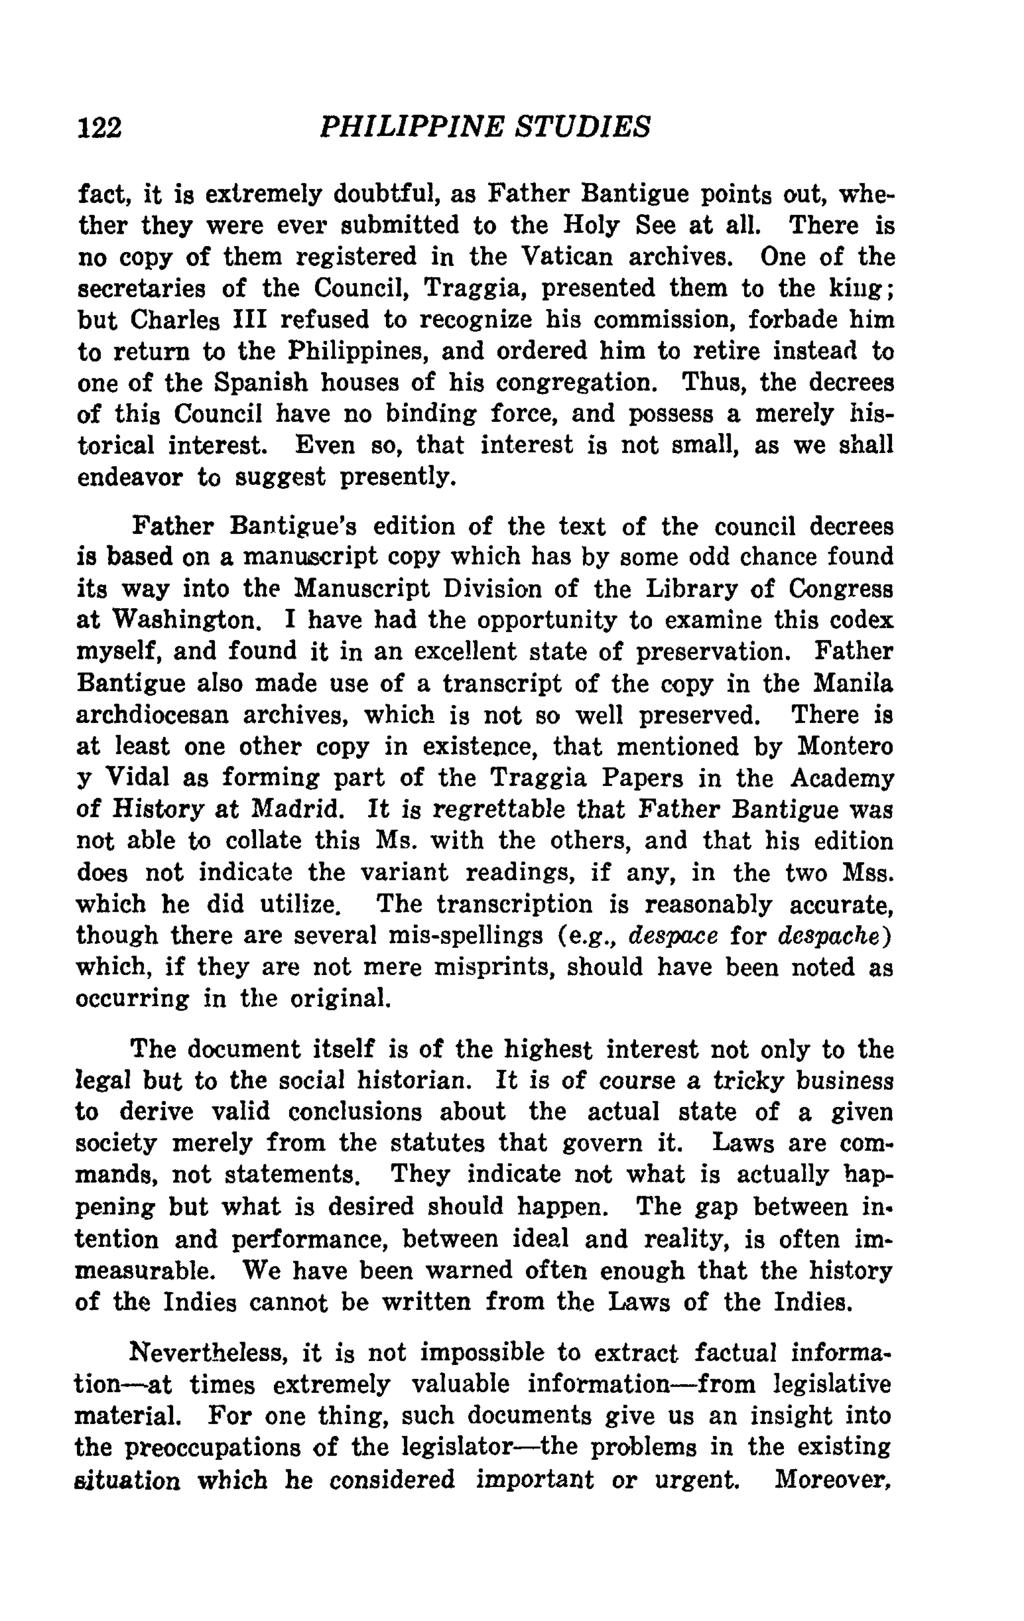 PHILIPPINE STUDIES fact, it is extremely doubtful, as Father Bantigue points out, whether they were ever submitted to the Holy See at all. There is no copy of them registered in the Vatican archives.